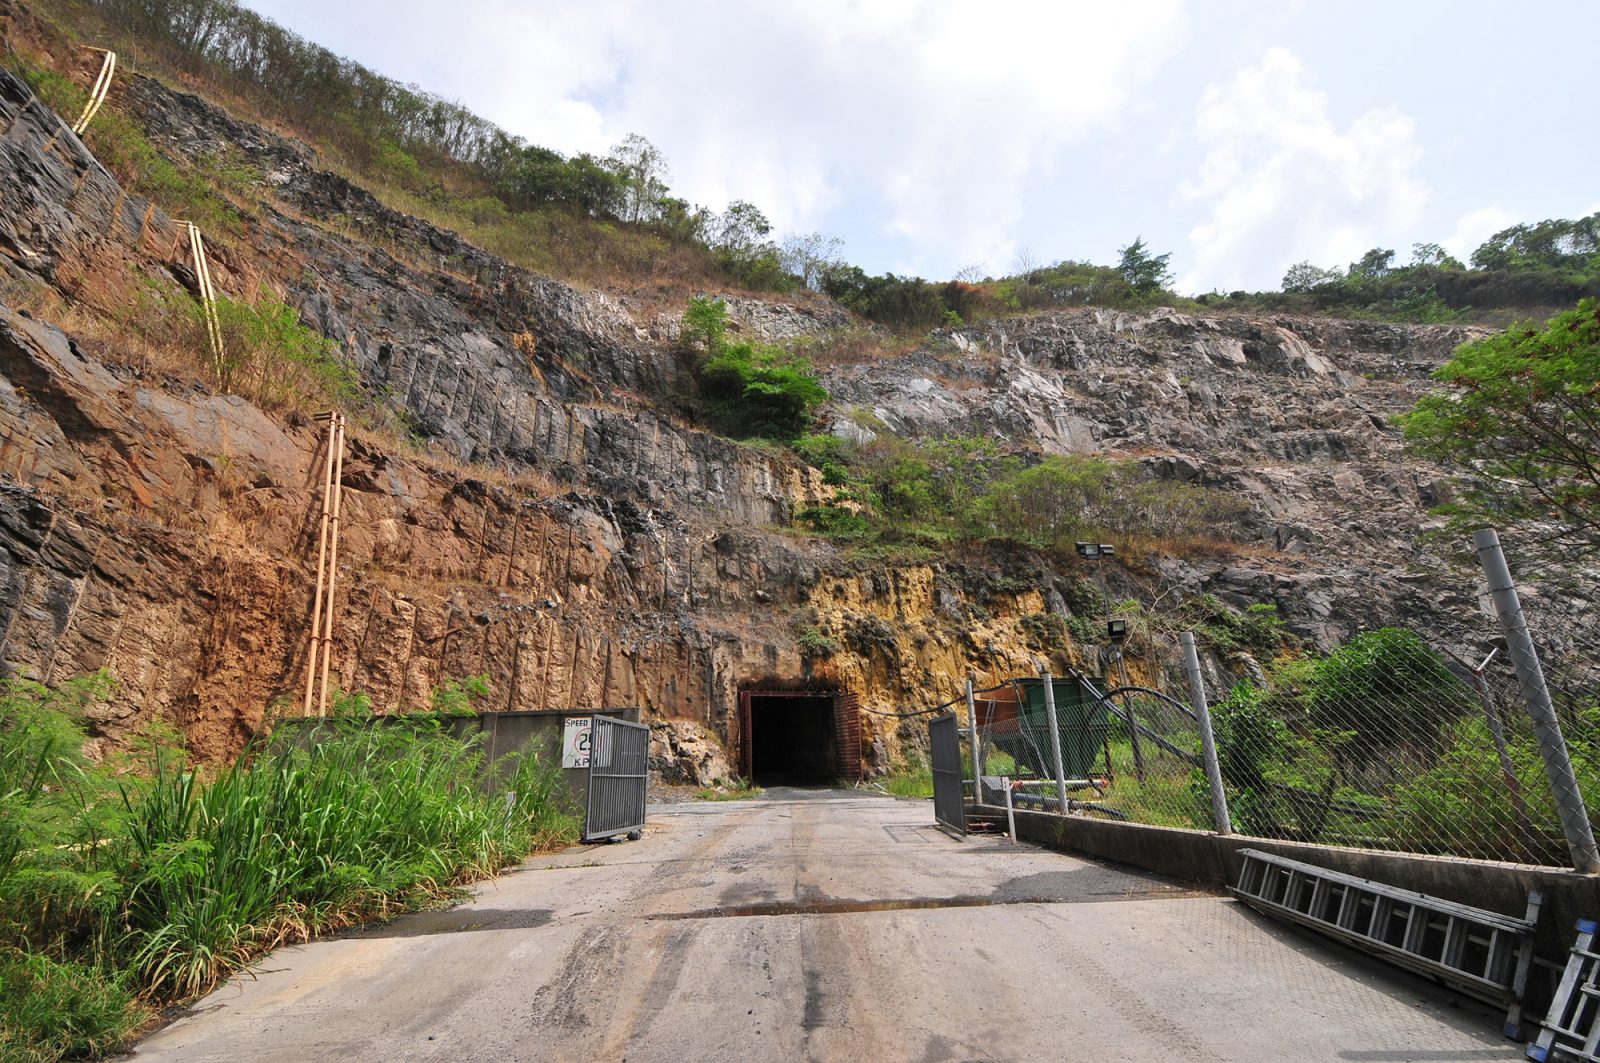 Ramp to enter an underground gold mine in Ghana, dug into the side of a pit